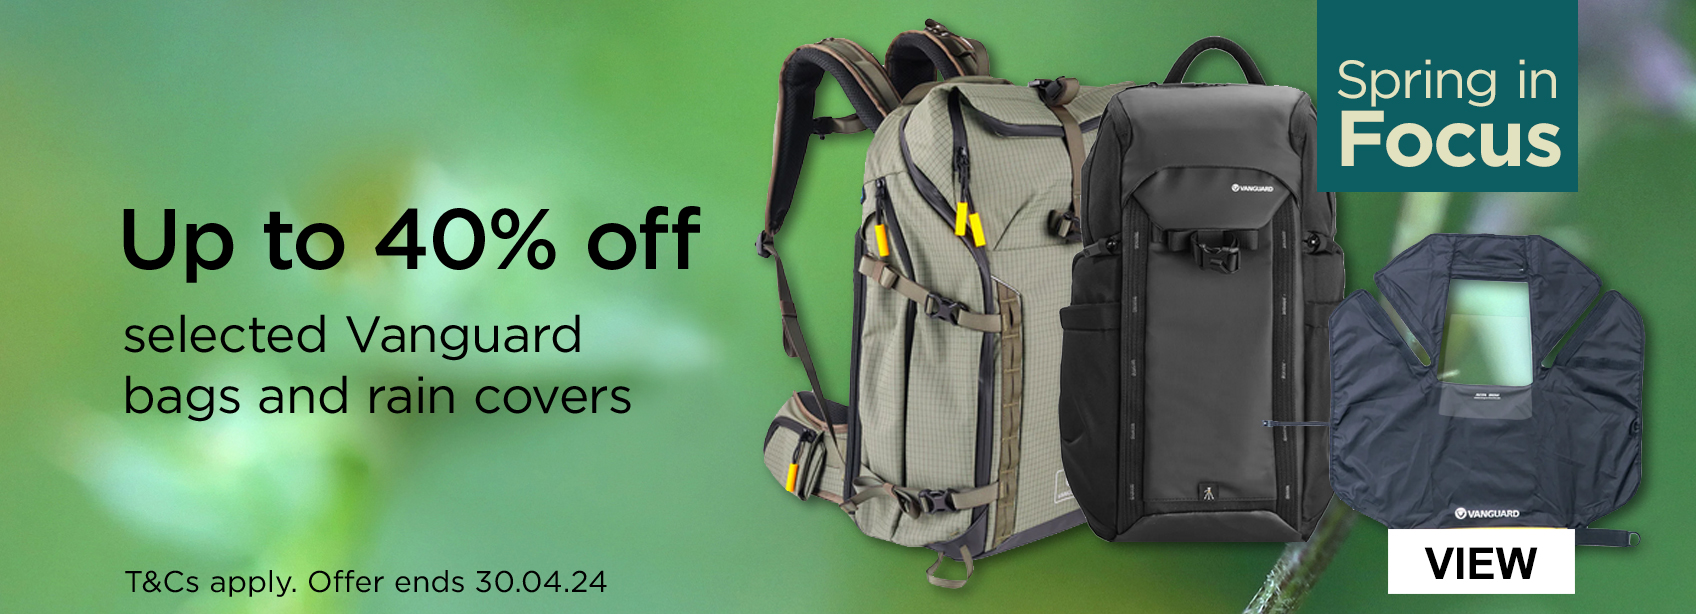 Up to 40% off selected Vanguard bags and rain covers